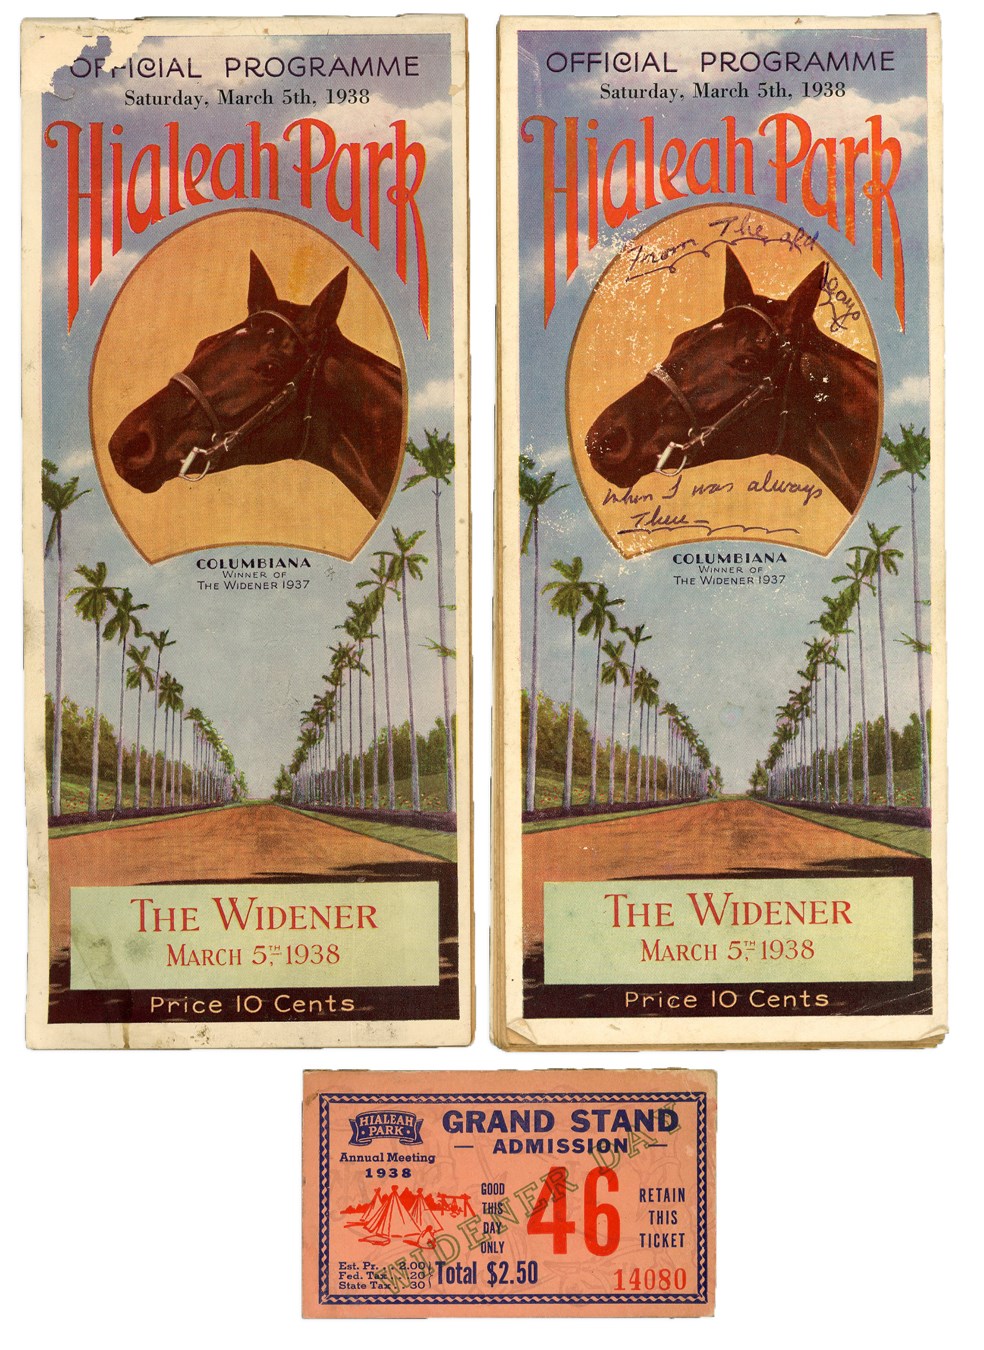 - 1938 War Admiral "The Widener" Programs and Ticket (3)